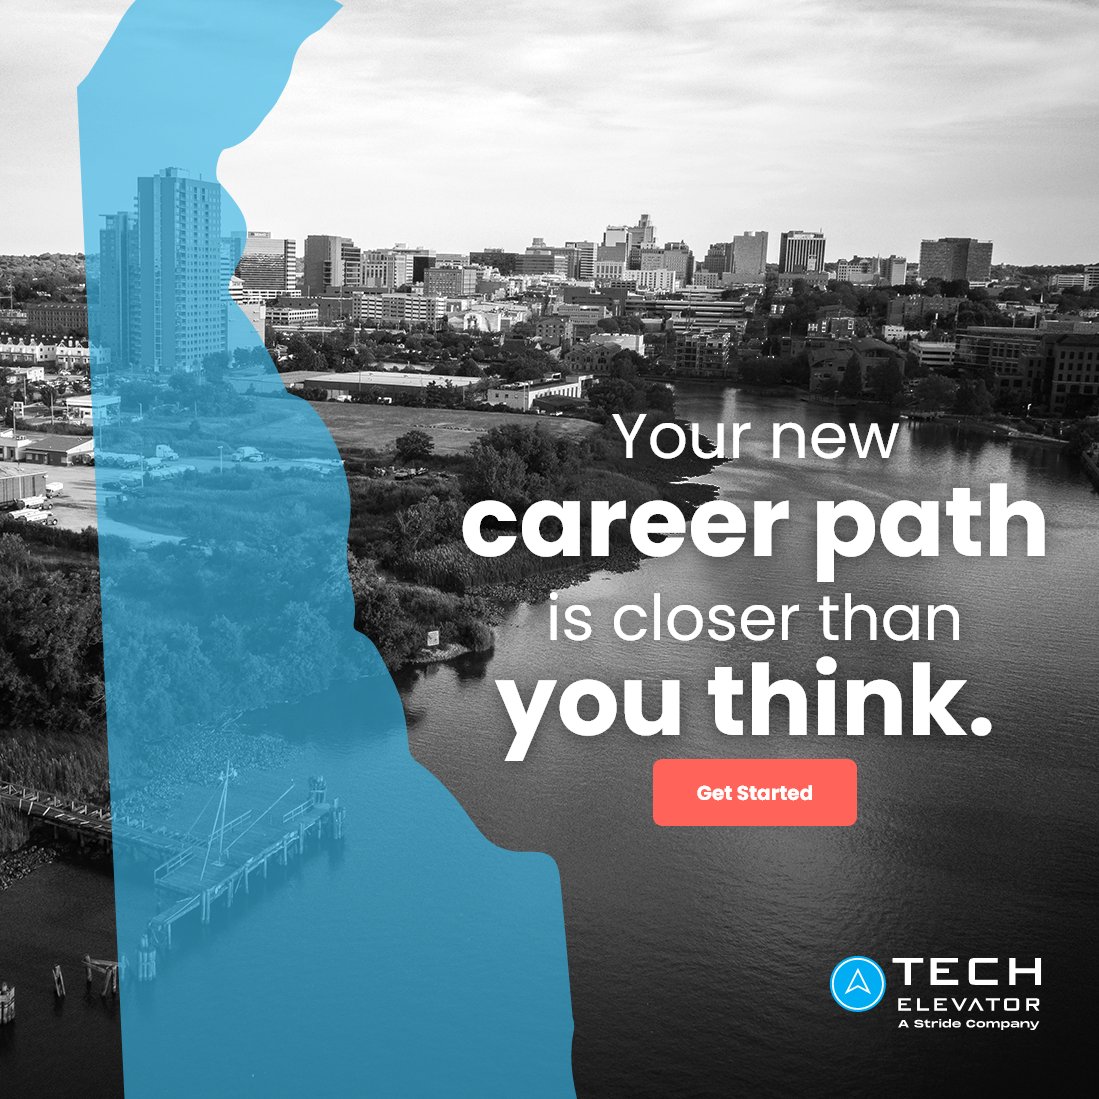 Hey there, Delaware! 👋 Tech Elevator and Tech Impact have teamed up to bring you a life-changing opportunity. Kickstart your dream career in the tech industry with us at no cost. Full-tuition scholarships are now available! 🌟 See if you qualify today: brnw.ch/21wI87k